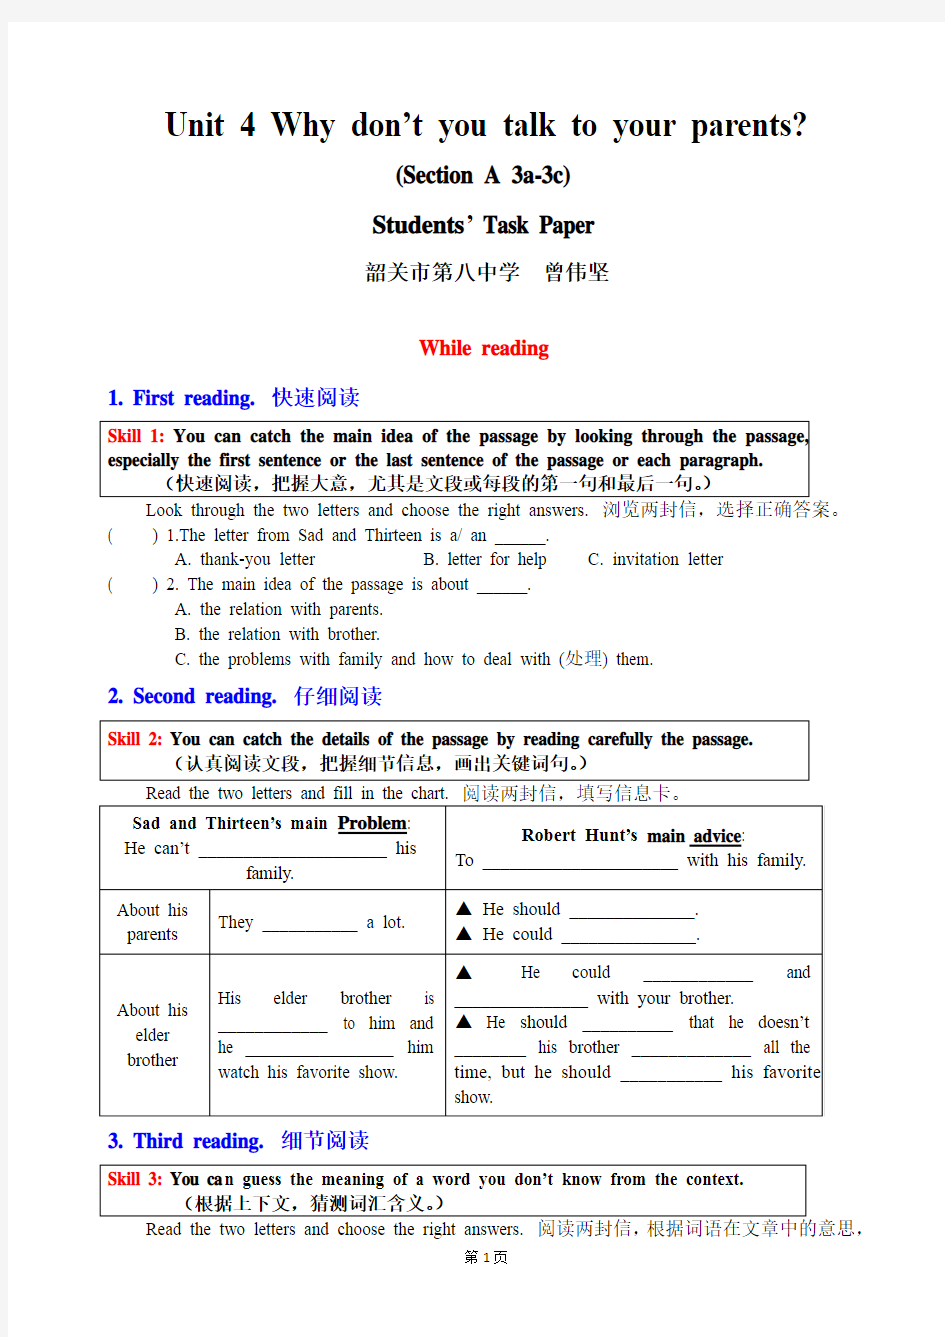 Students' Task Paper